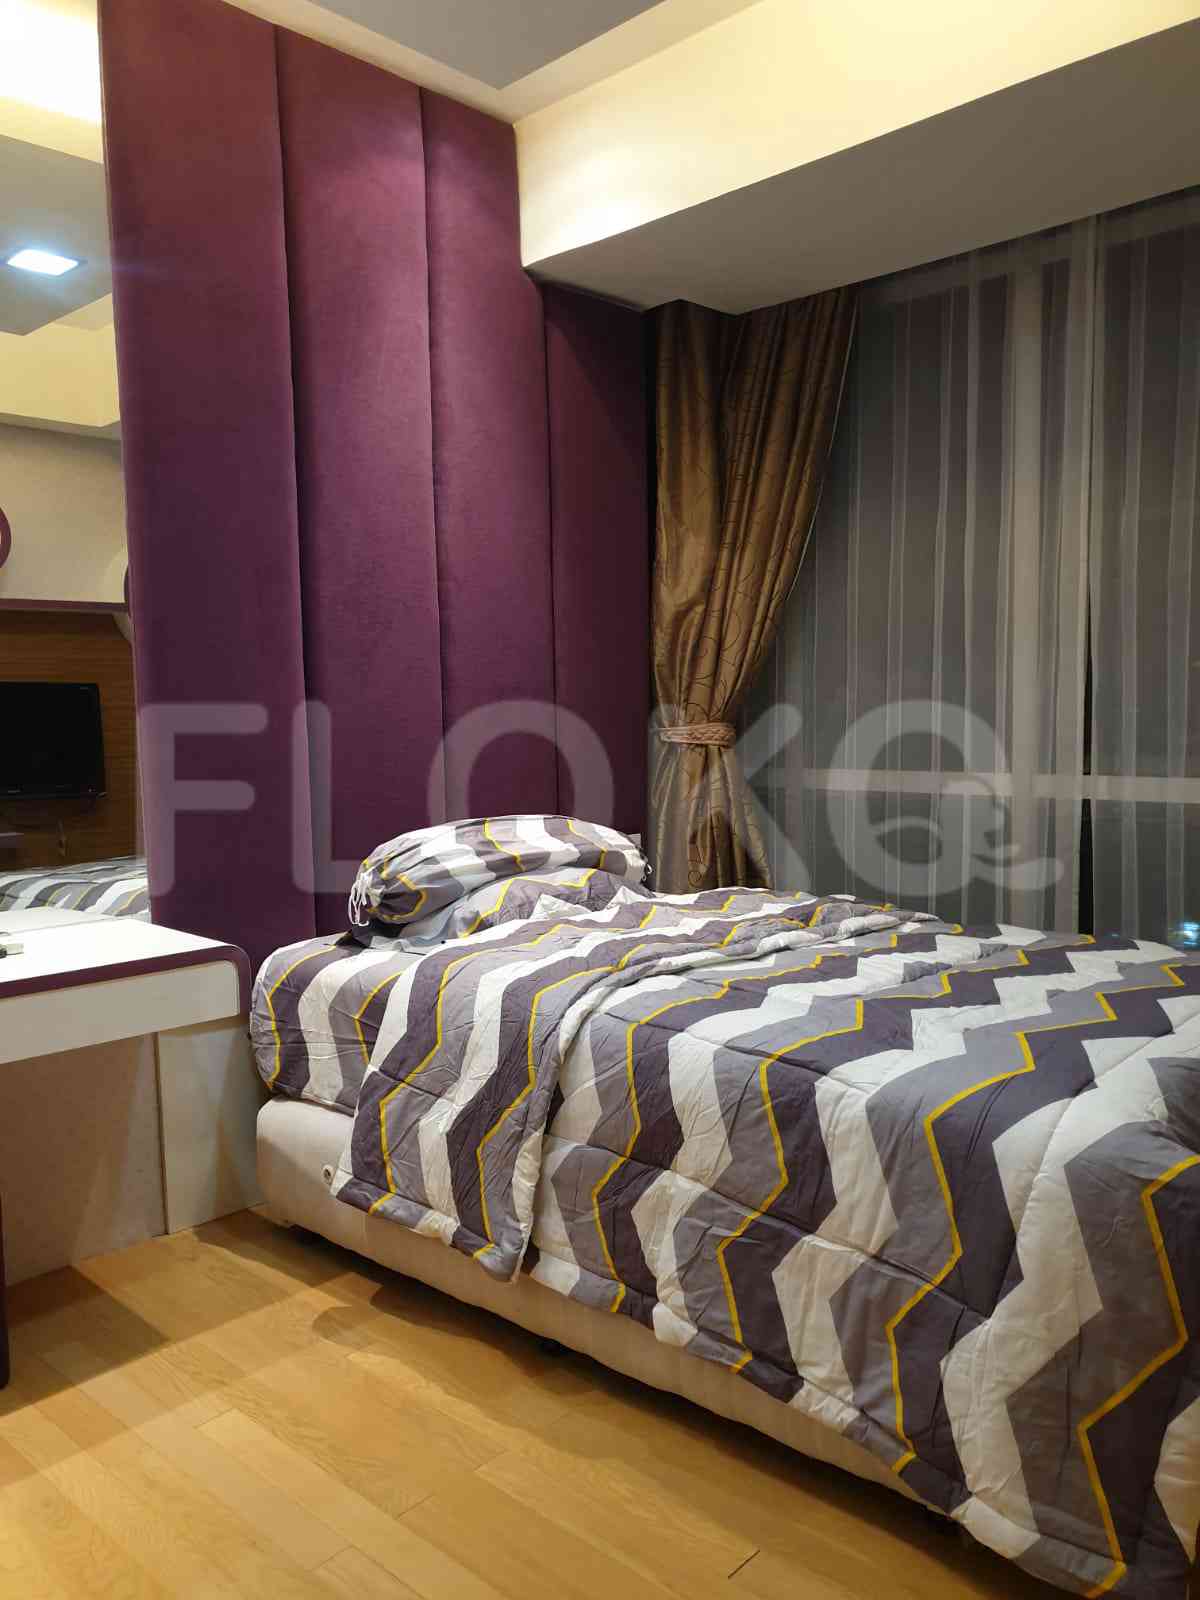 3 Bedroom on 16th Floor for Rent in Kemang Village Residence - fked77 6